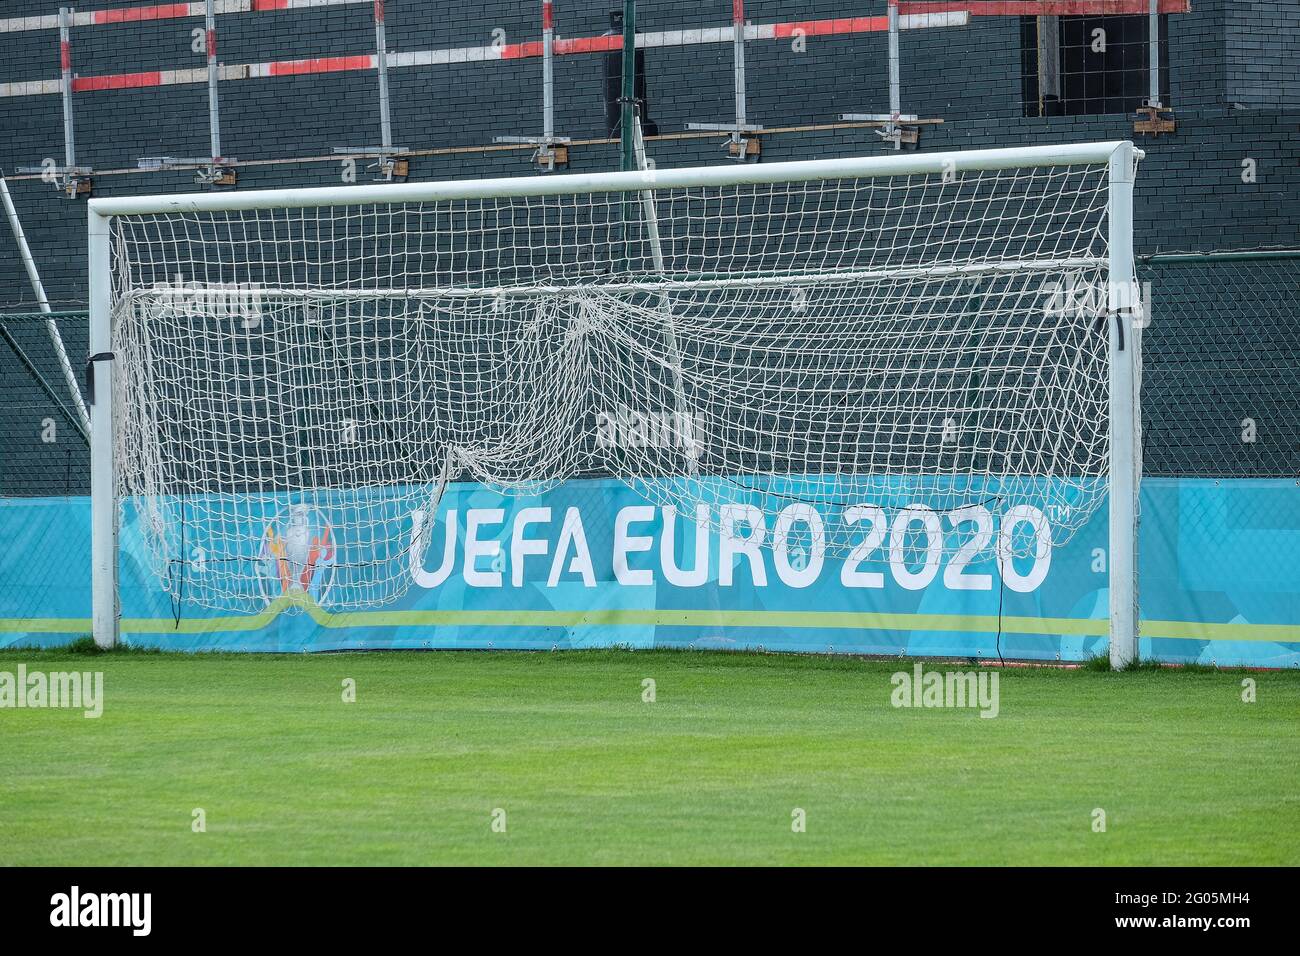 Illustration picture shows the UEFA Euro 2020 logo, at the Proximus Basecamp, the training centre of the Red Devils, Belgian national soccer team, in Stock Photo